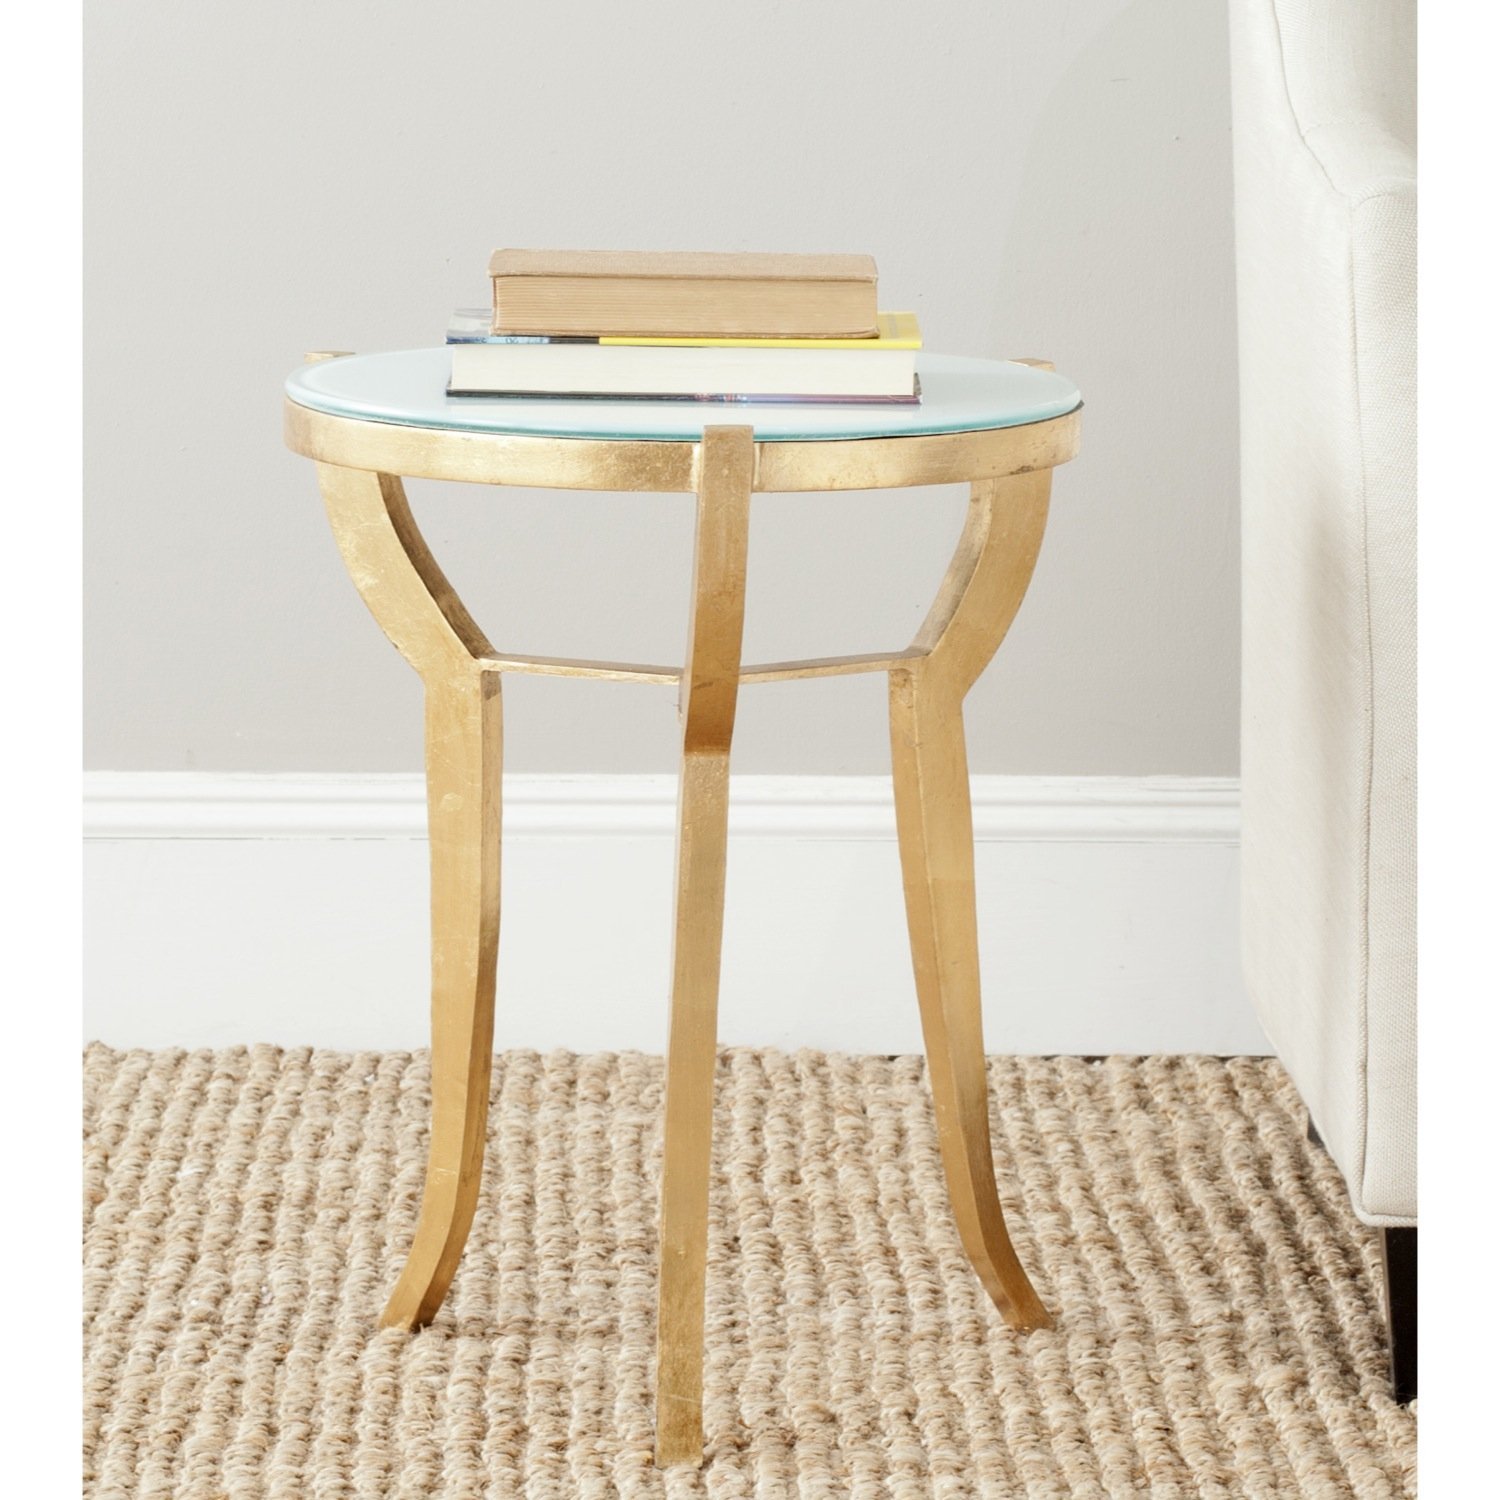 bright gold accent table elegant home design montrez storage drum narrow dining granite cocktail ikea side farm with bench unfinished bedside round oak ceramic patio large grey